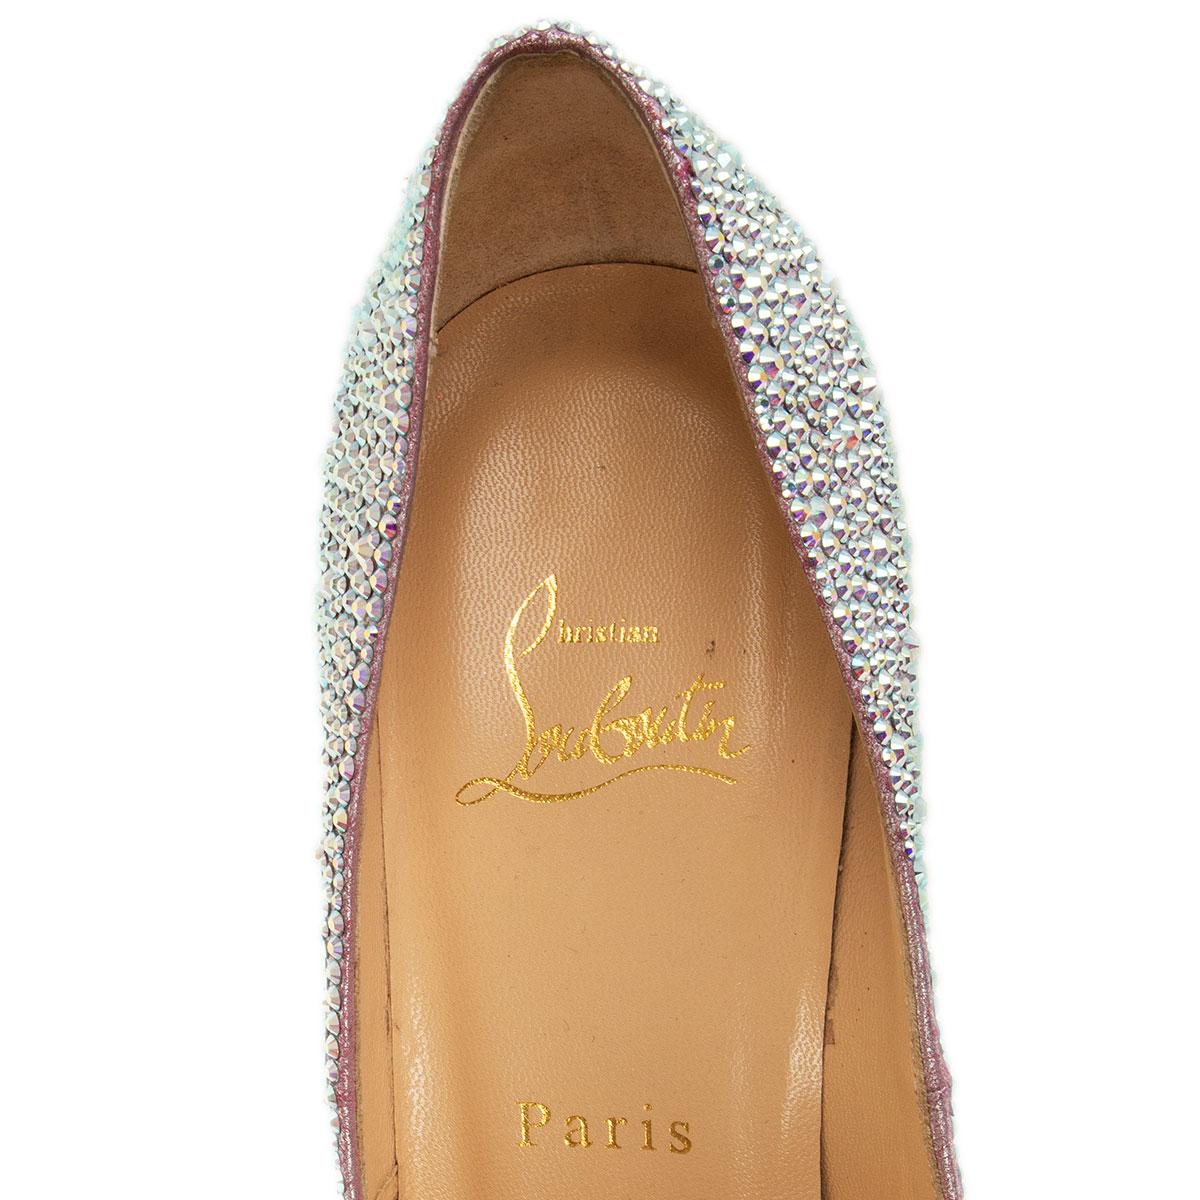 Beige CHRISTIAN LOUBOUTIN iridescent CRYSTAL EMBELLISHED FIFI 100 Pumps Shoes 38